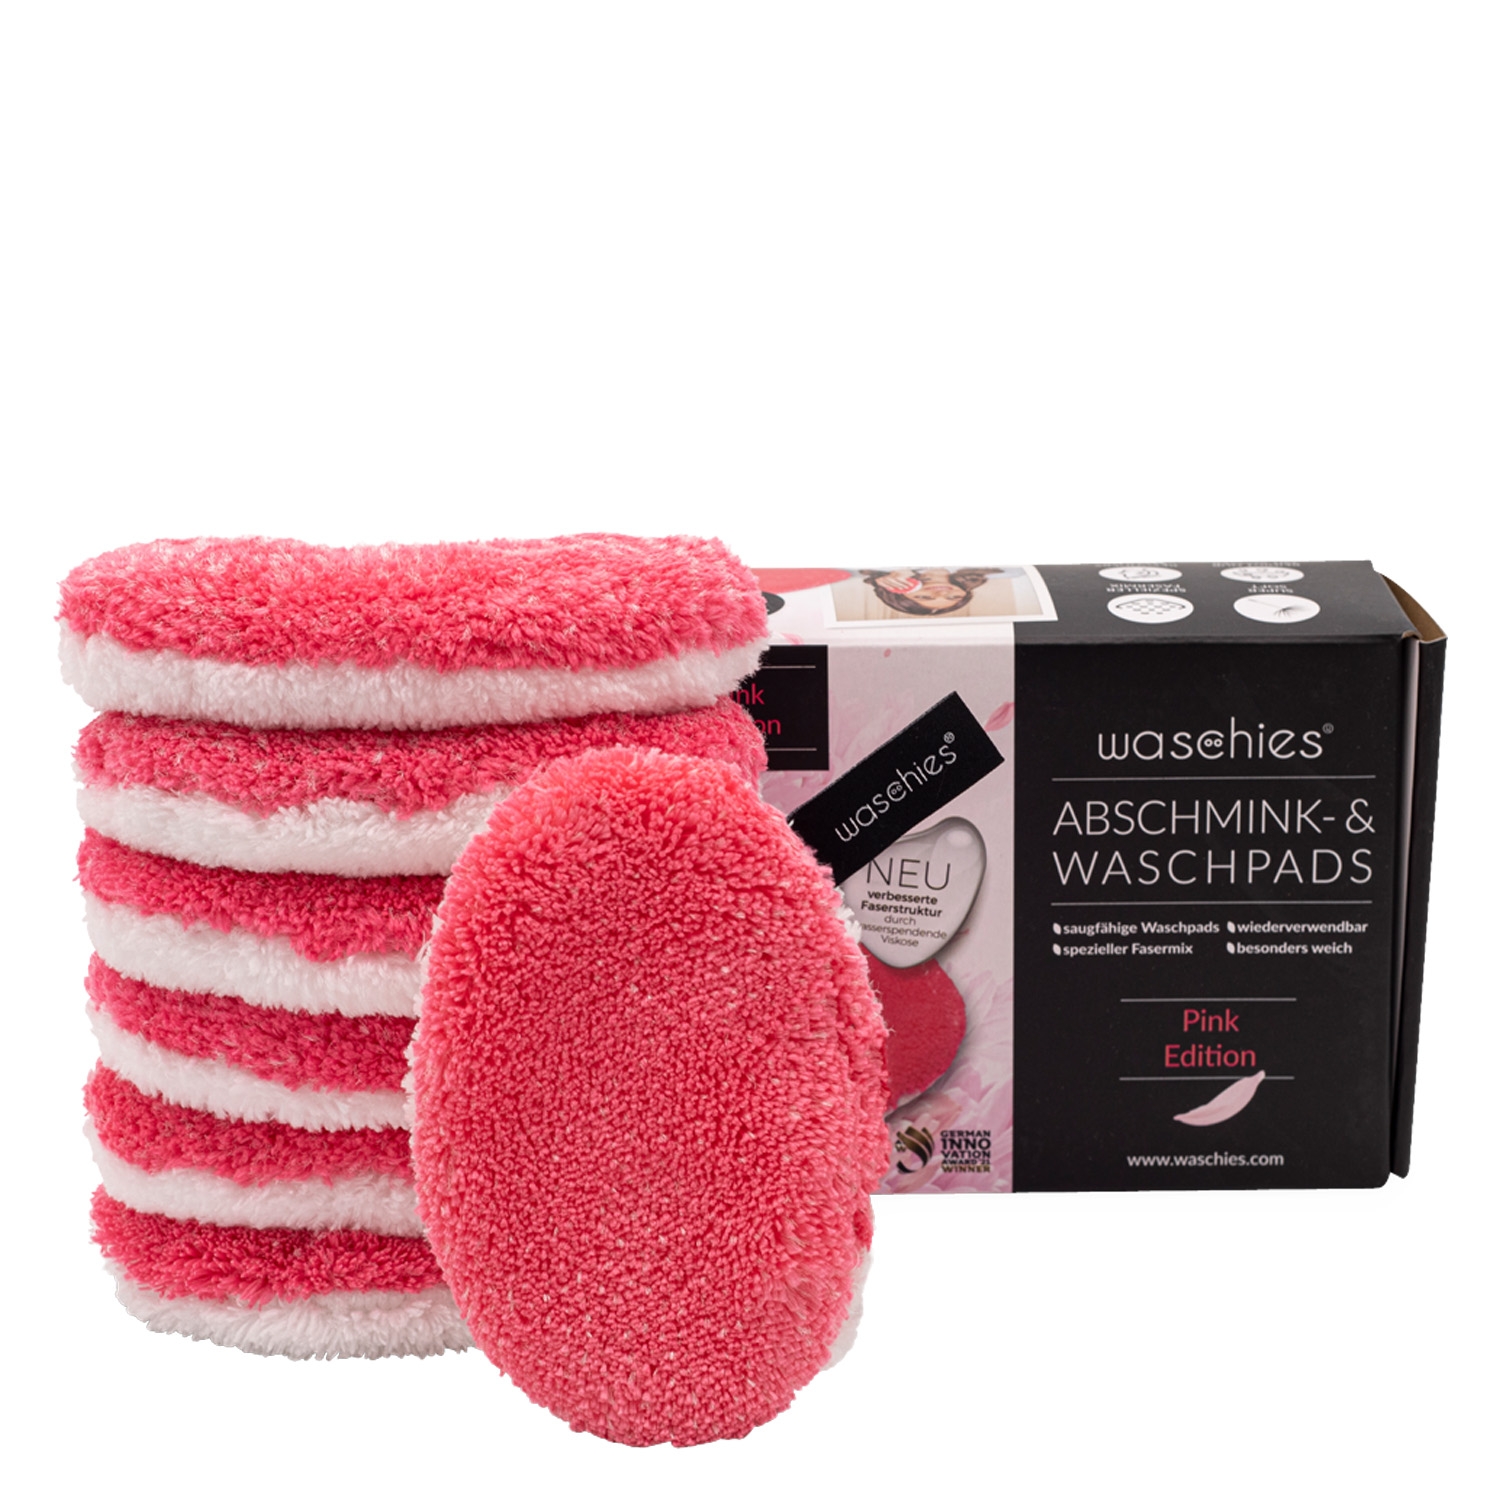 Product image from Waschies Faceline - Abschminkpads & Waschpads Pink Classic-Edition